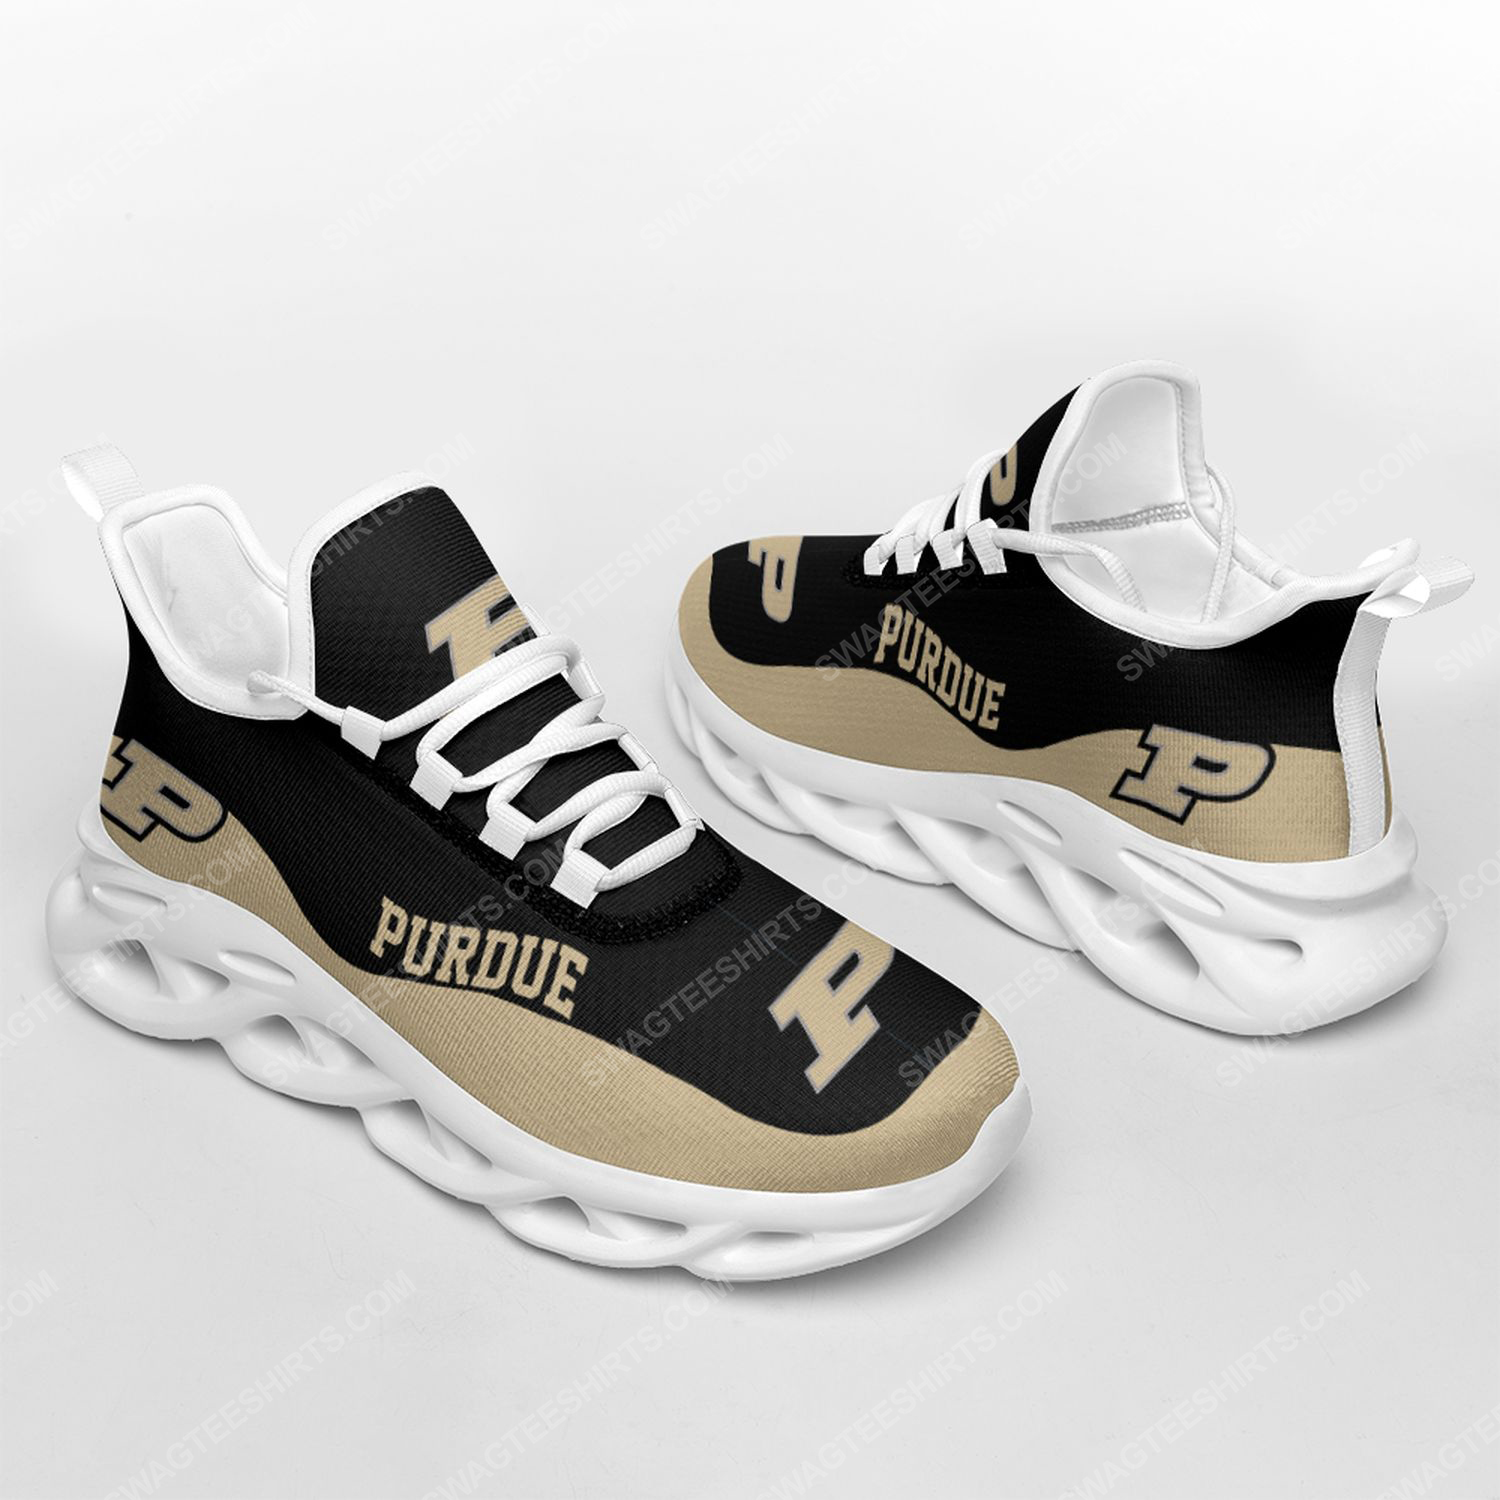 [special edition] The purdue boilermakers football team max soul shoes – Maria